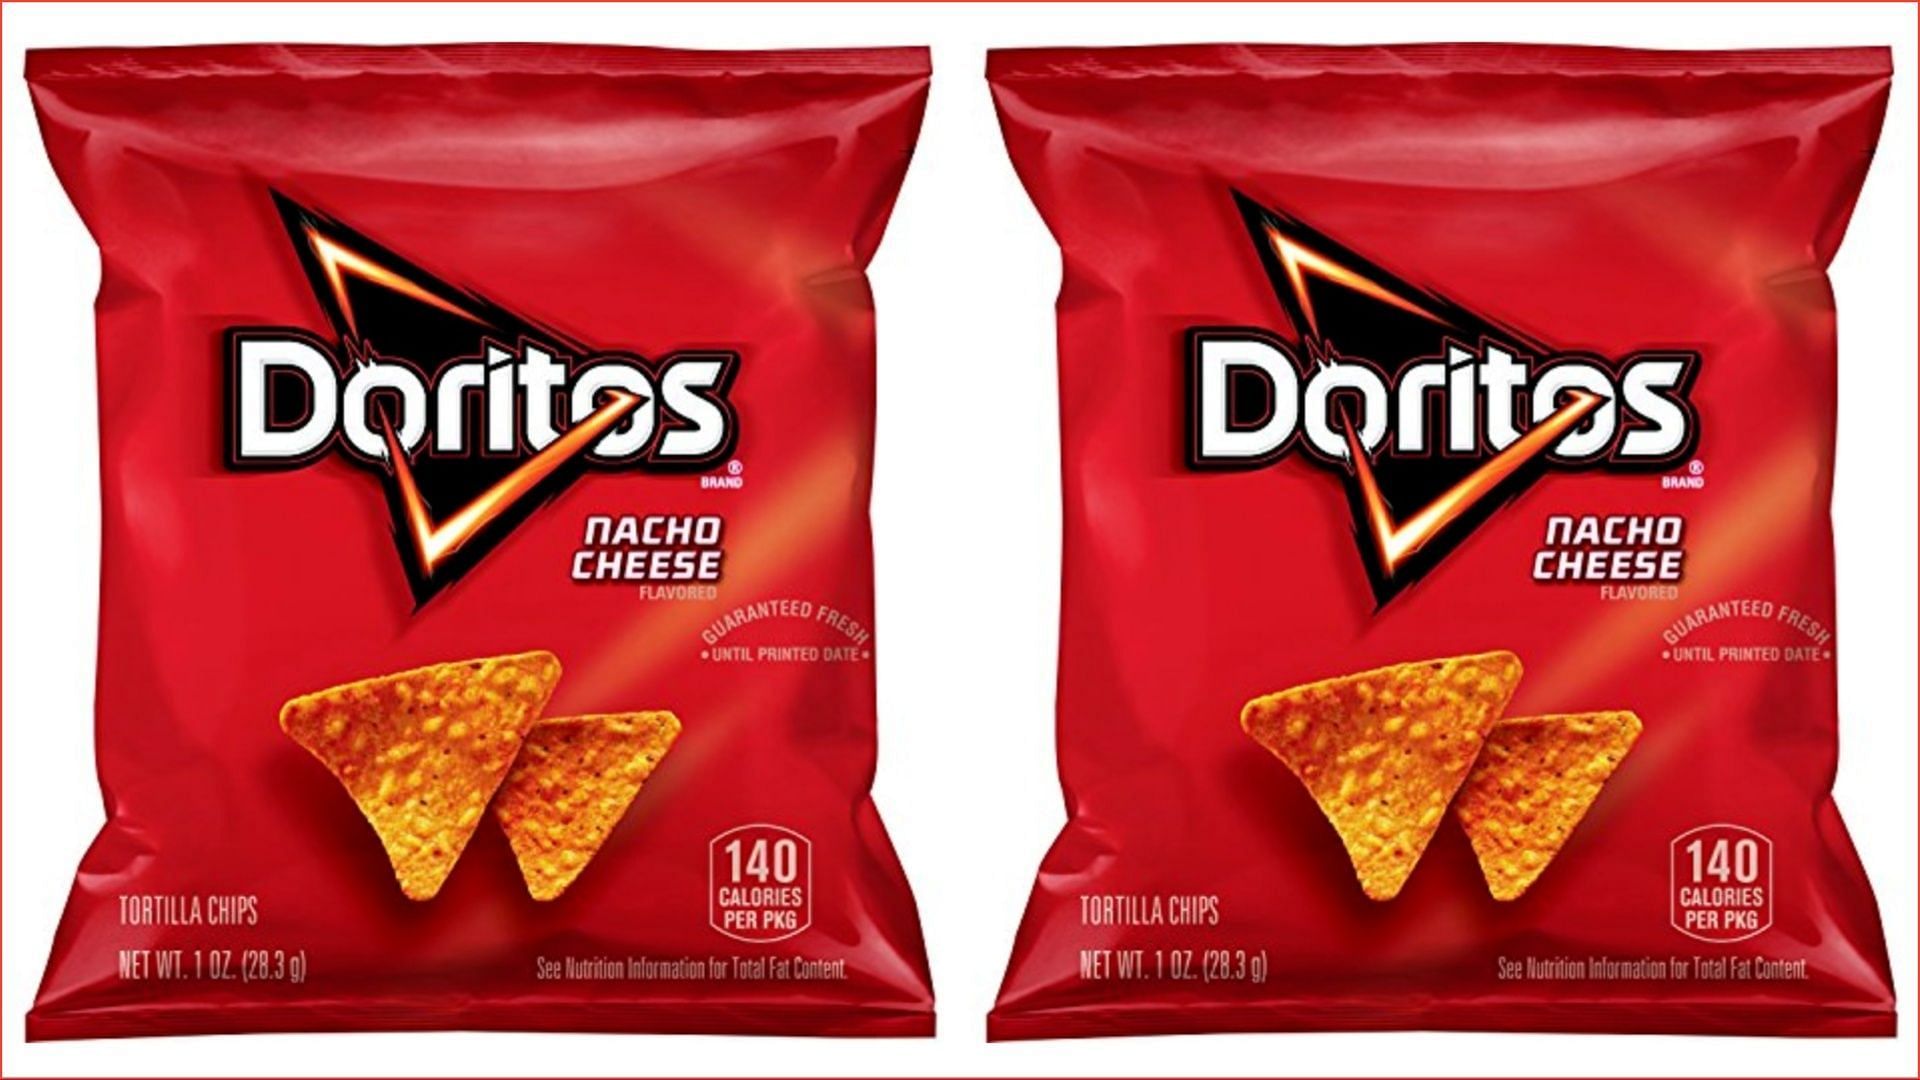 Doritos New AR and Social Campaigns Supercharge Consumer Engagement   Consumer Goods Technology